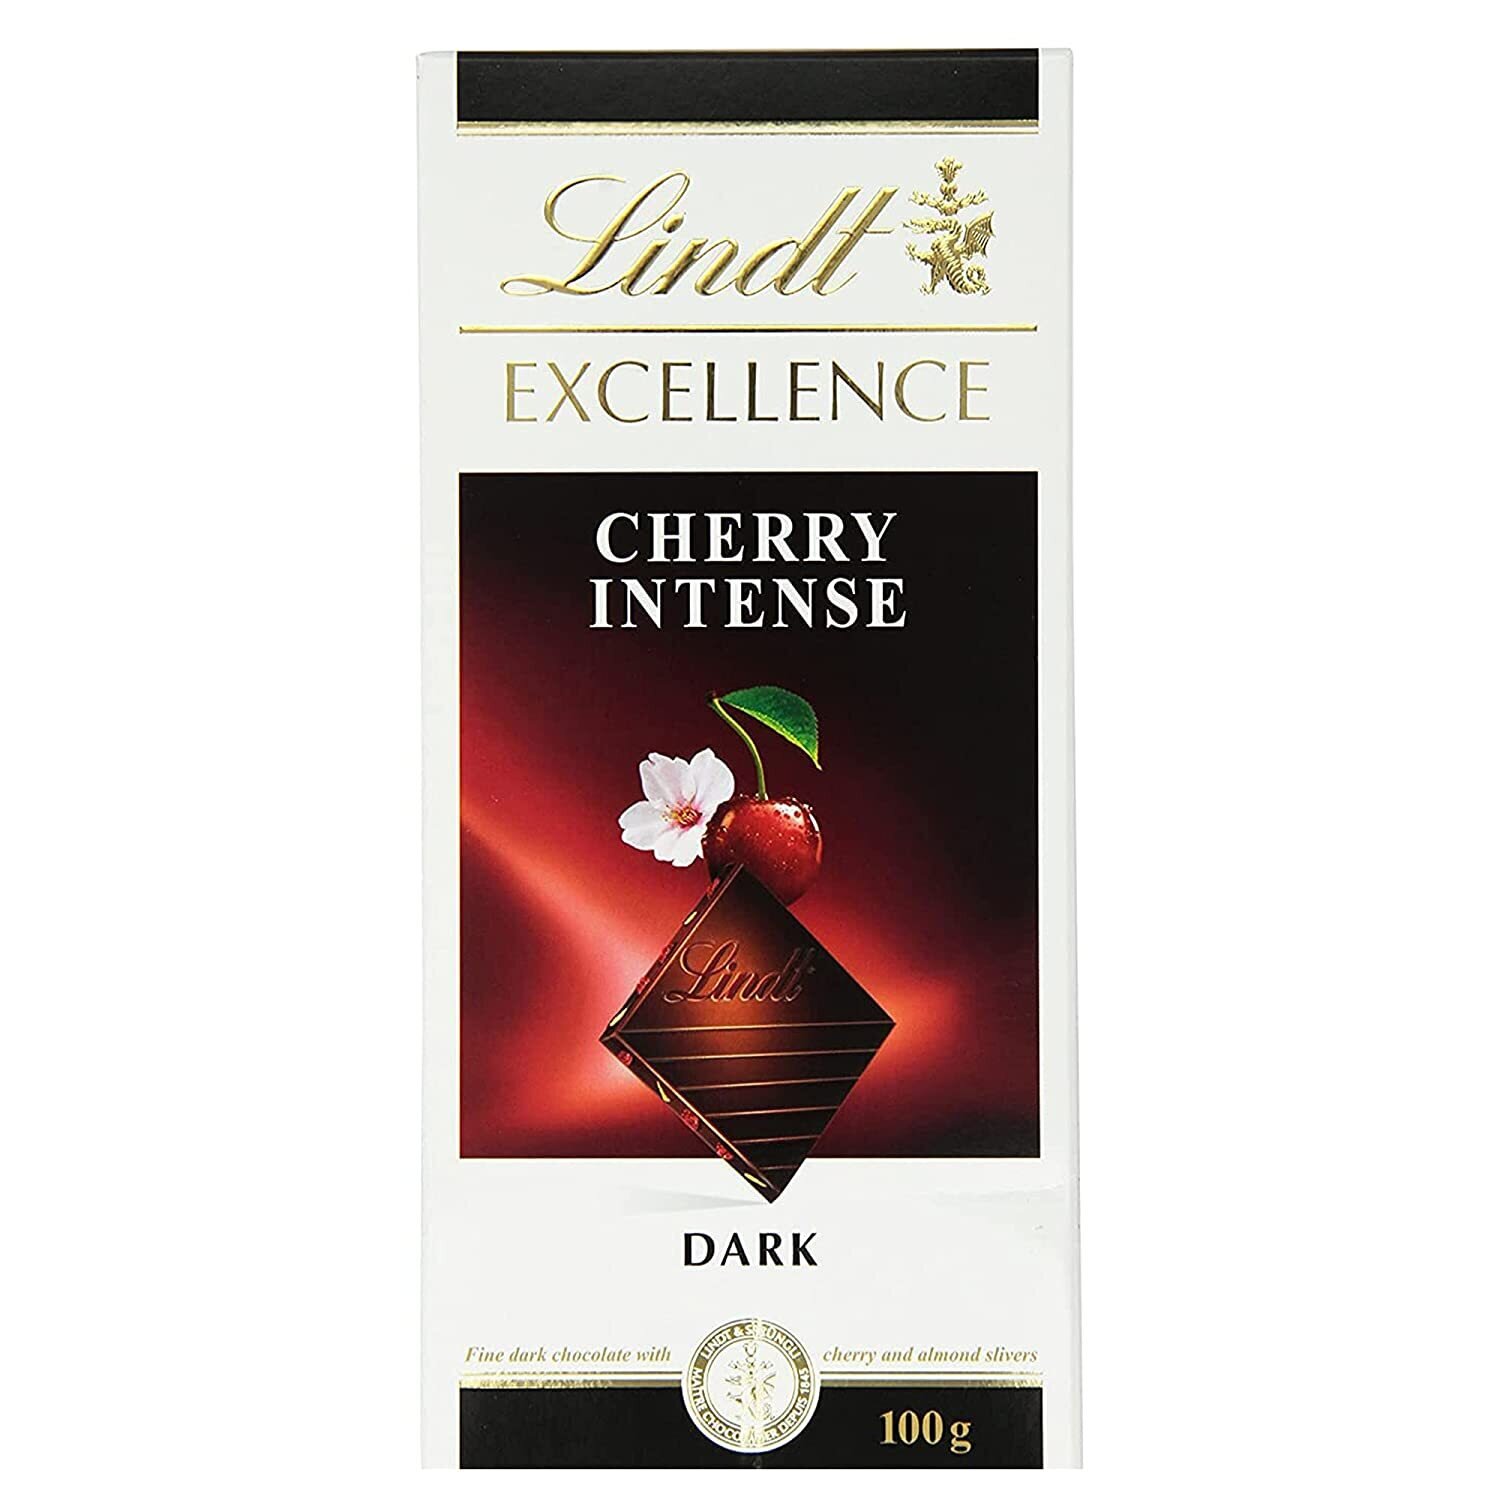 Lindt Excellence Cherry Intense - 100G